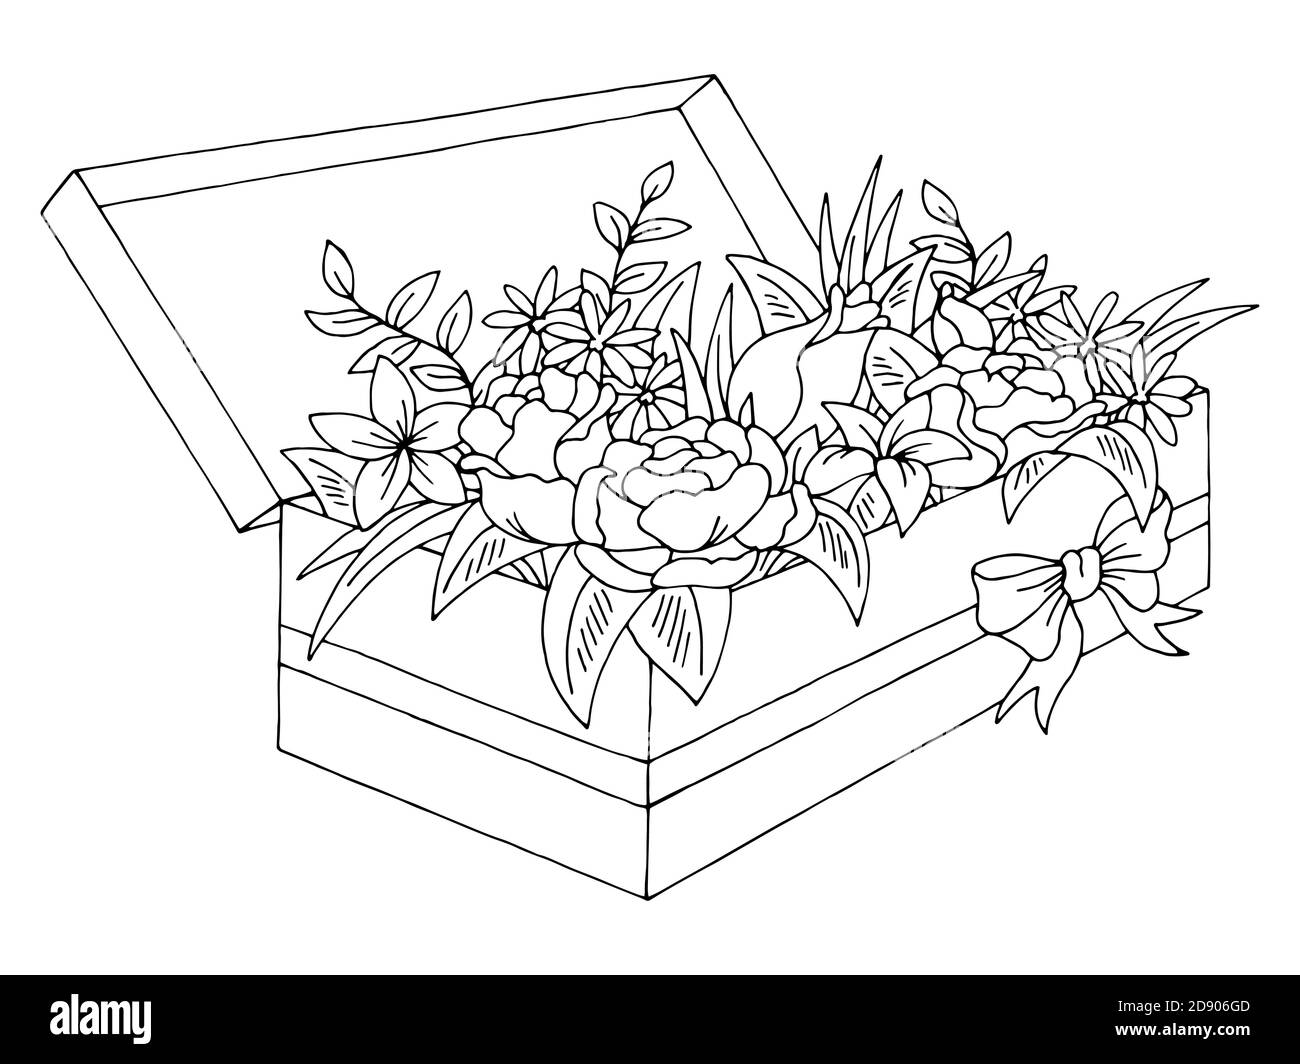 Flower box graphic black white isolated bouquet sketch illustration vector Stock Vector